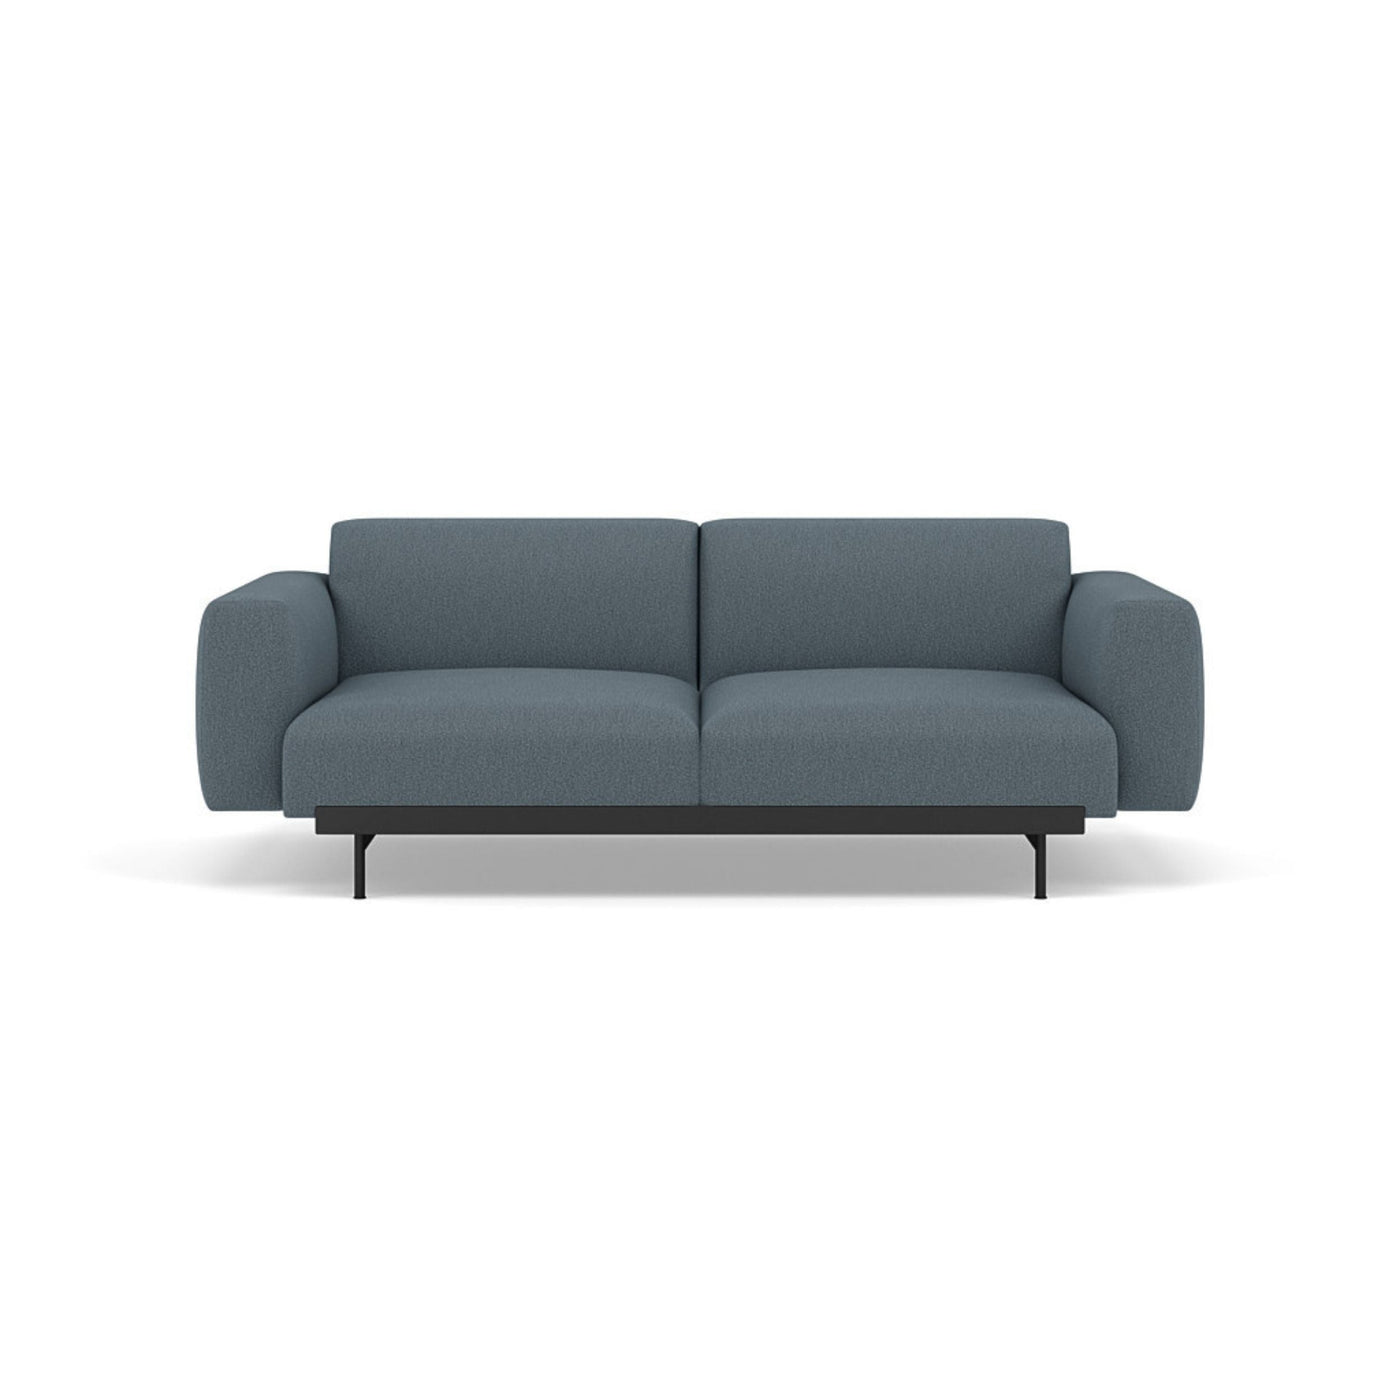 Muuto In Situ Modular 2 Seater Sofa, configuration 1 in clay 1 fabric. Made to order from someday designs #colour_clay-1-blue